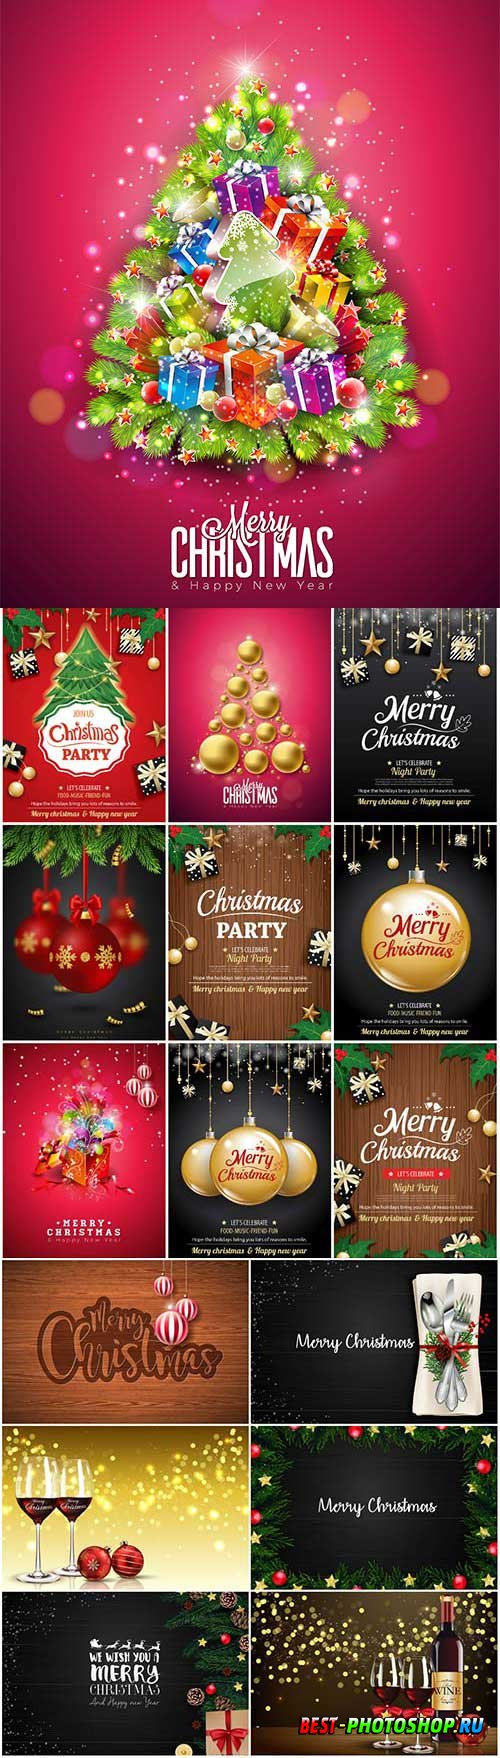 New Year and Christmas vector vol 10